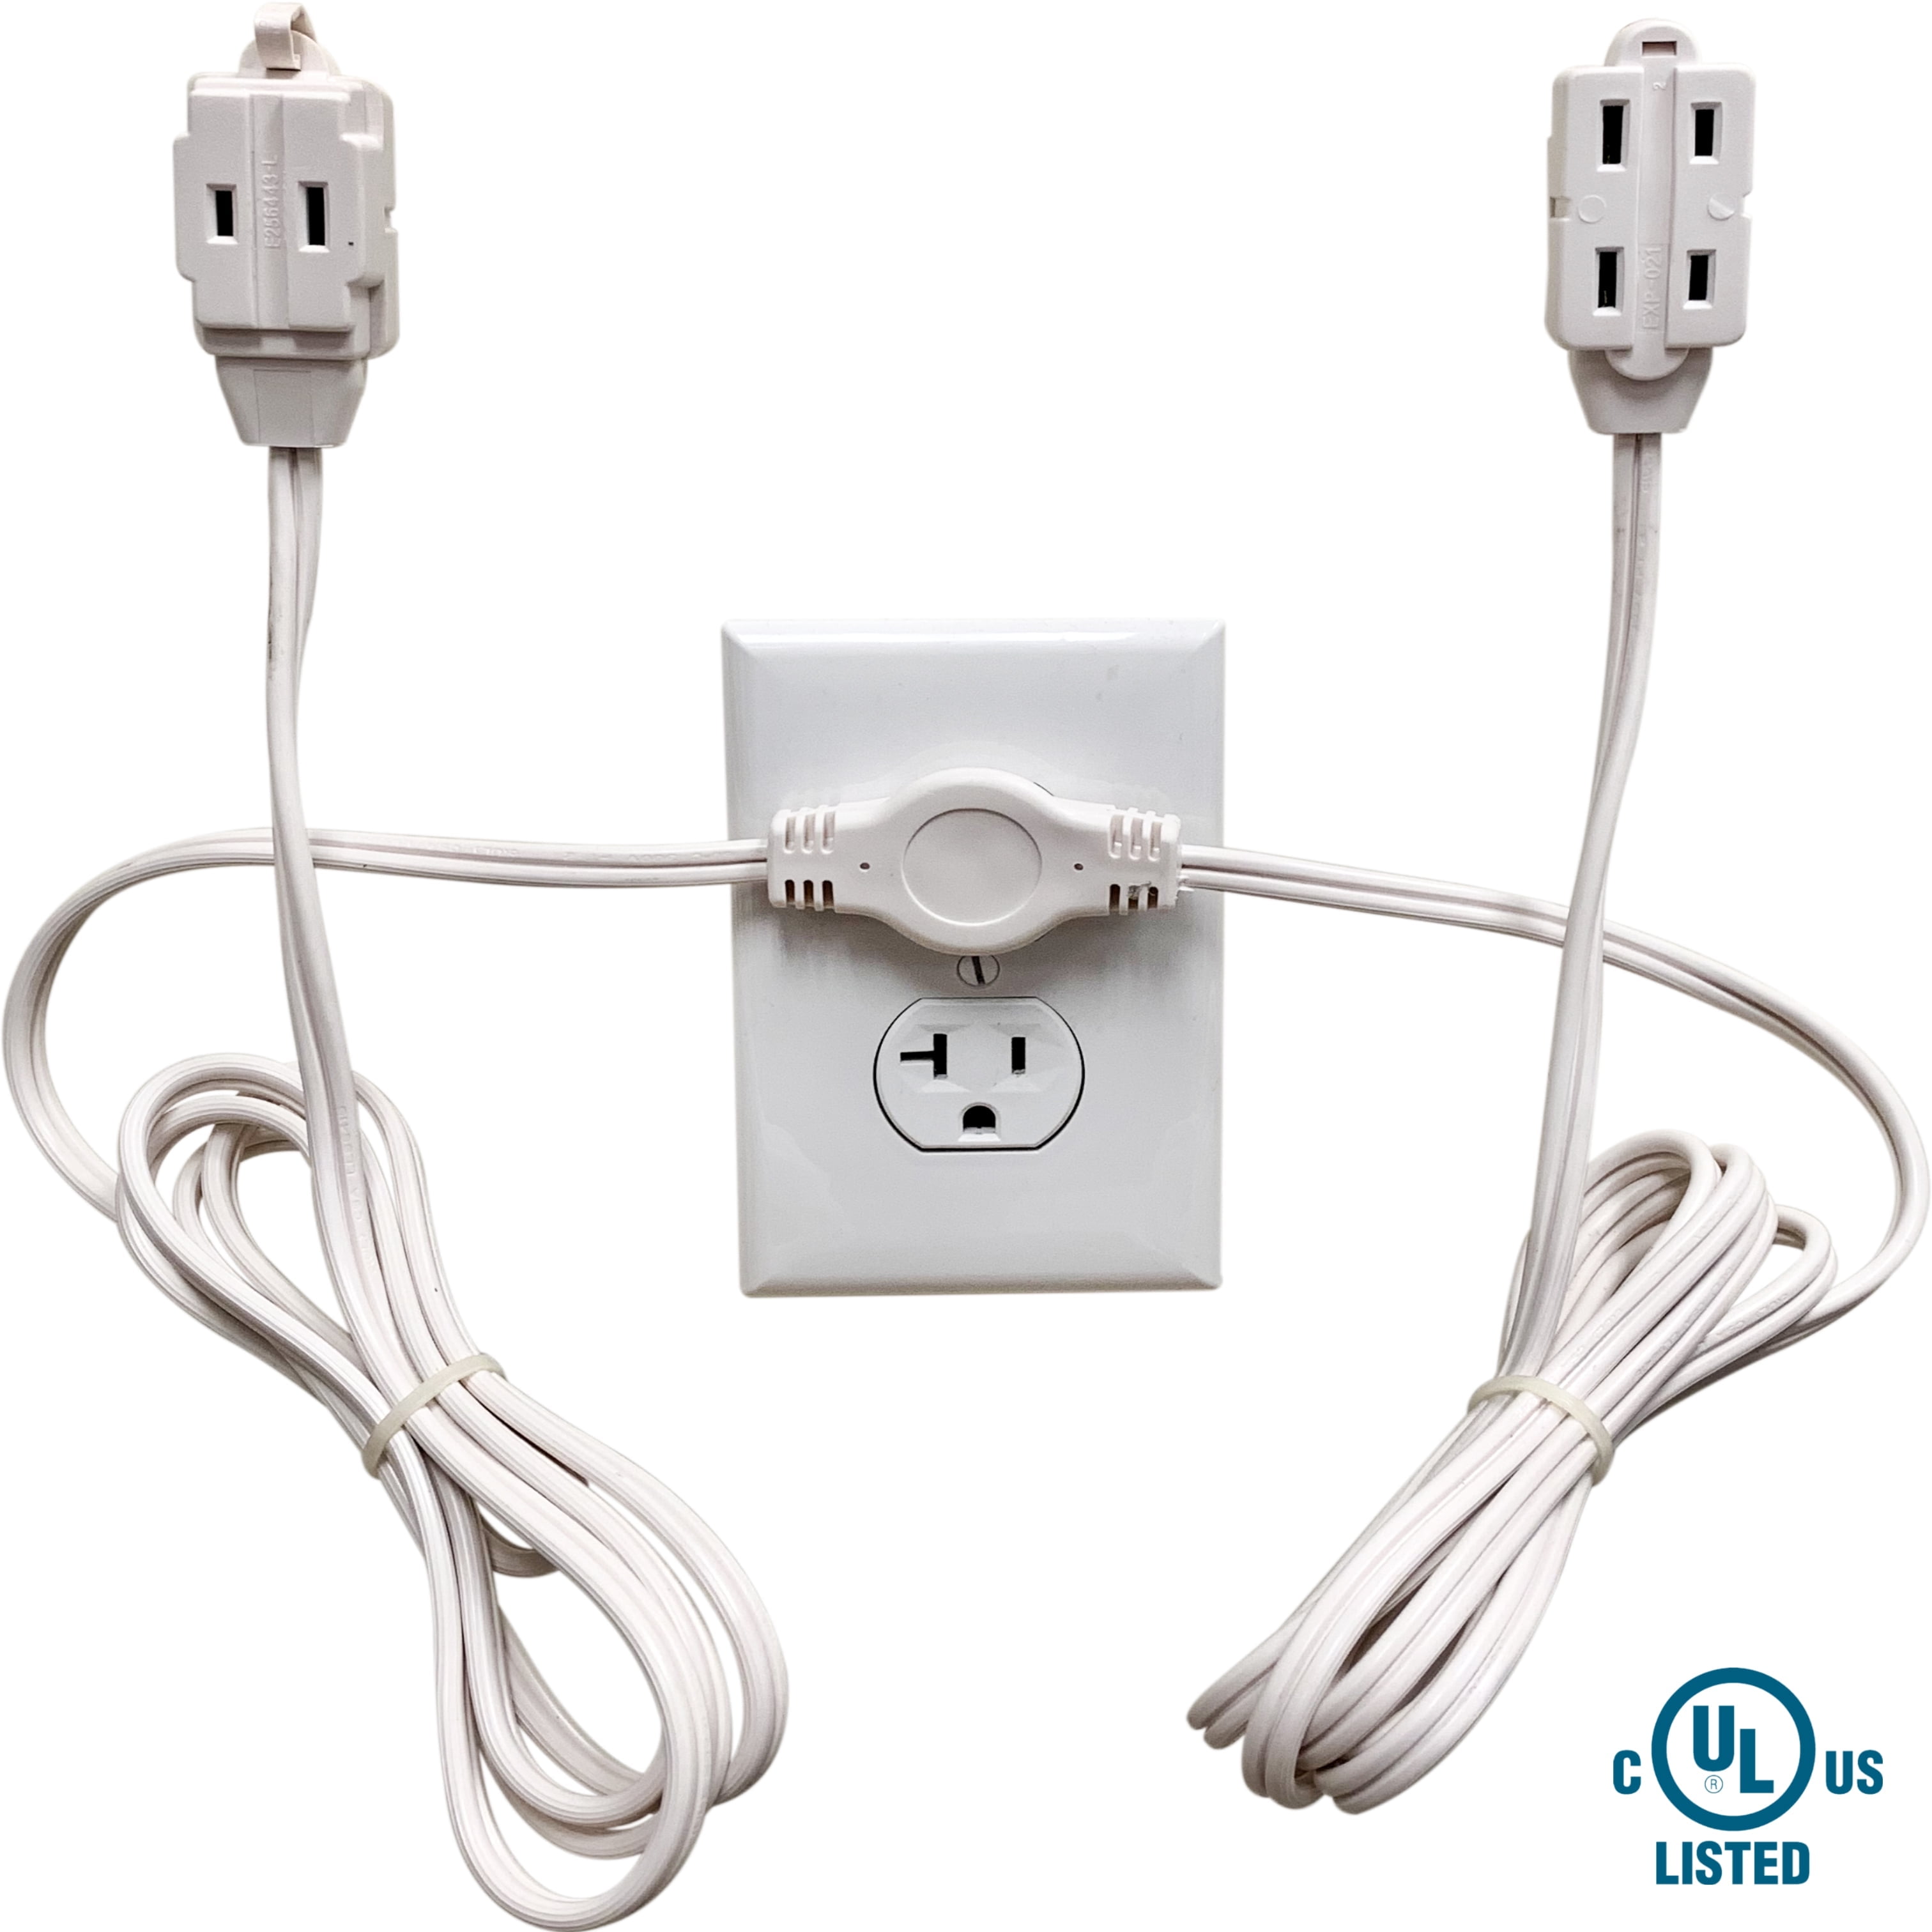 W4W Twin Extension Cord Power Strip - 24 Foot Cord - 12 Feet on Each Side - Flat Head (Wall Hugger) Outlet Plug - 6 Polarized Outlets with Safety